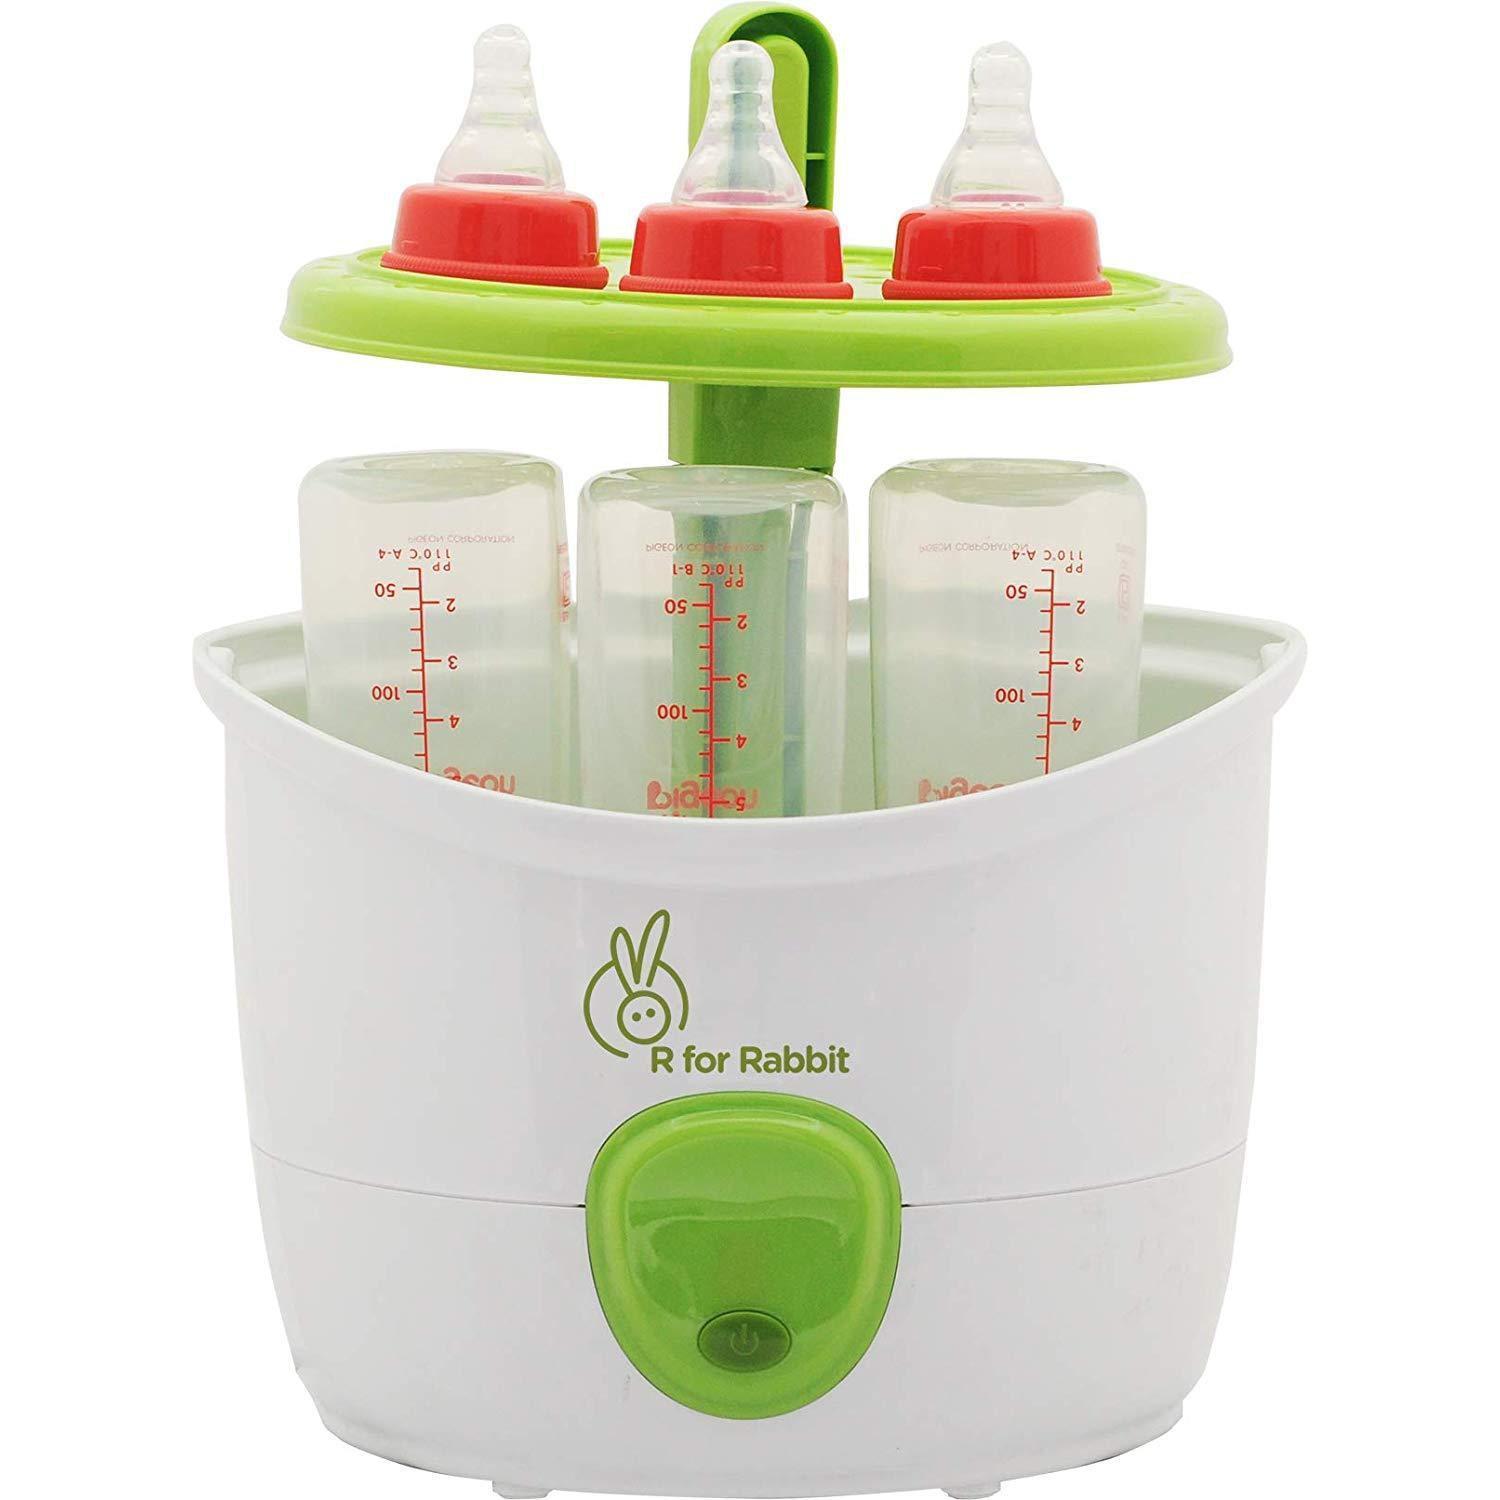 R for Rabbit Peter Fighter Plus - The Baby Bottle Steam Sterilizer